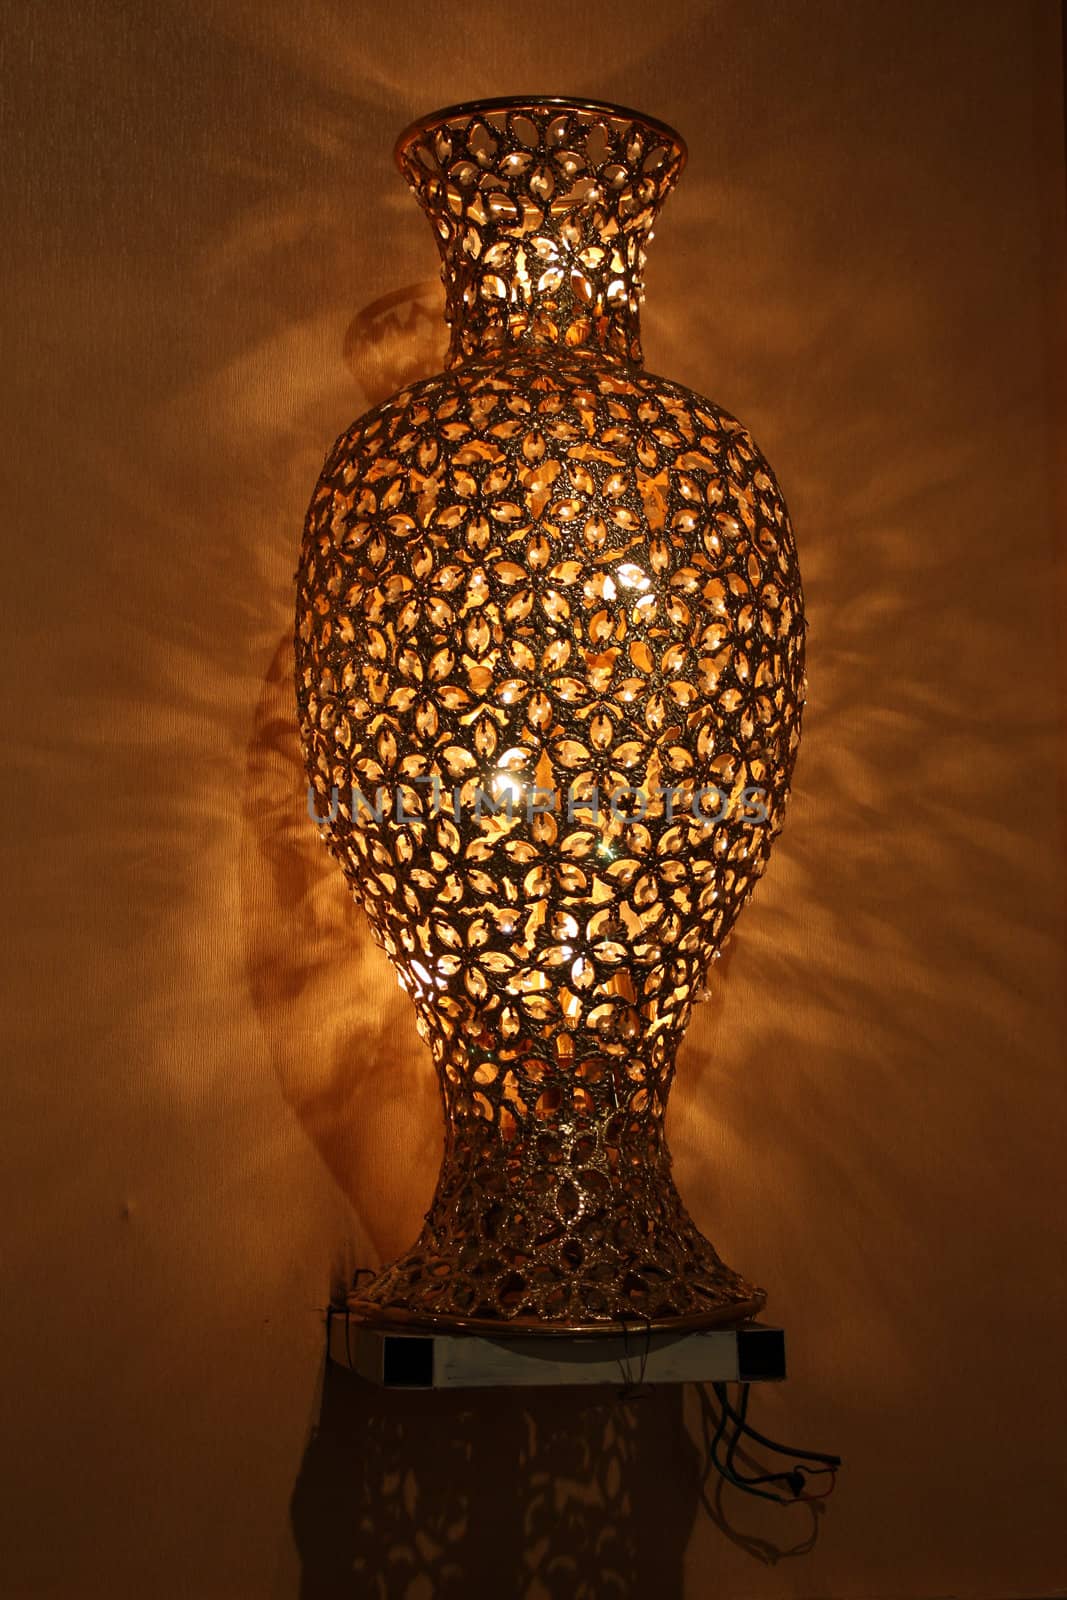 An antique lamp designed in the shape of a flower vase.